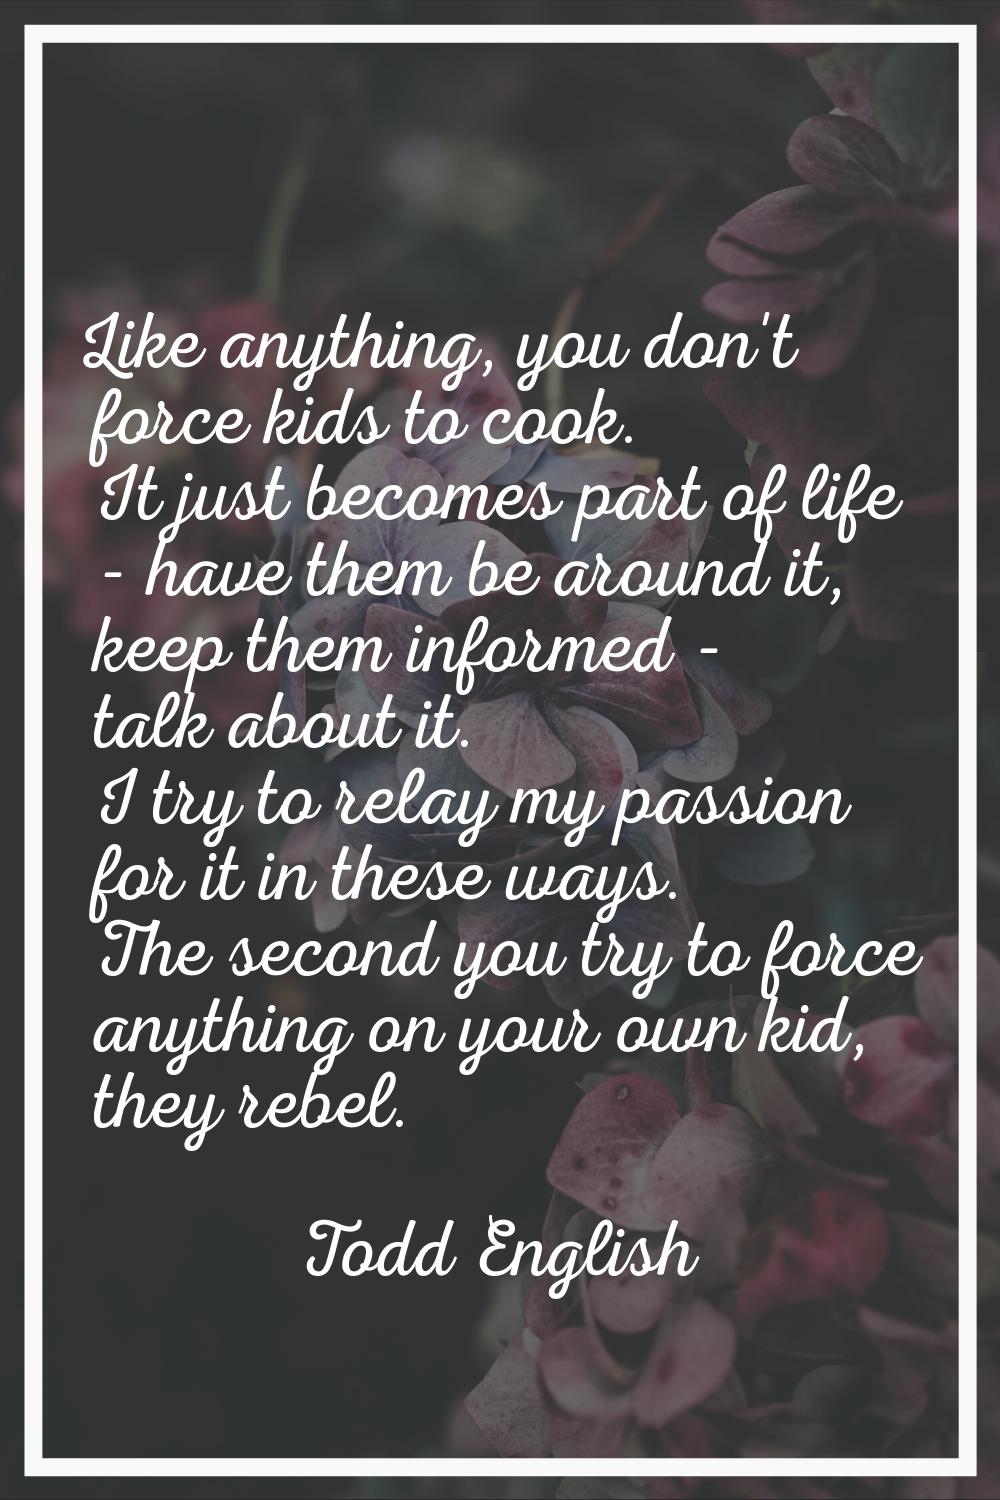 Like anything, you don't force kids to cook. It just becomes part of life - have them be around it,